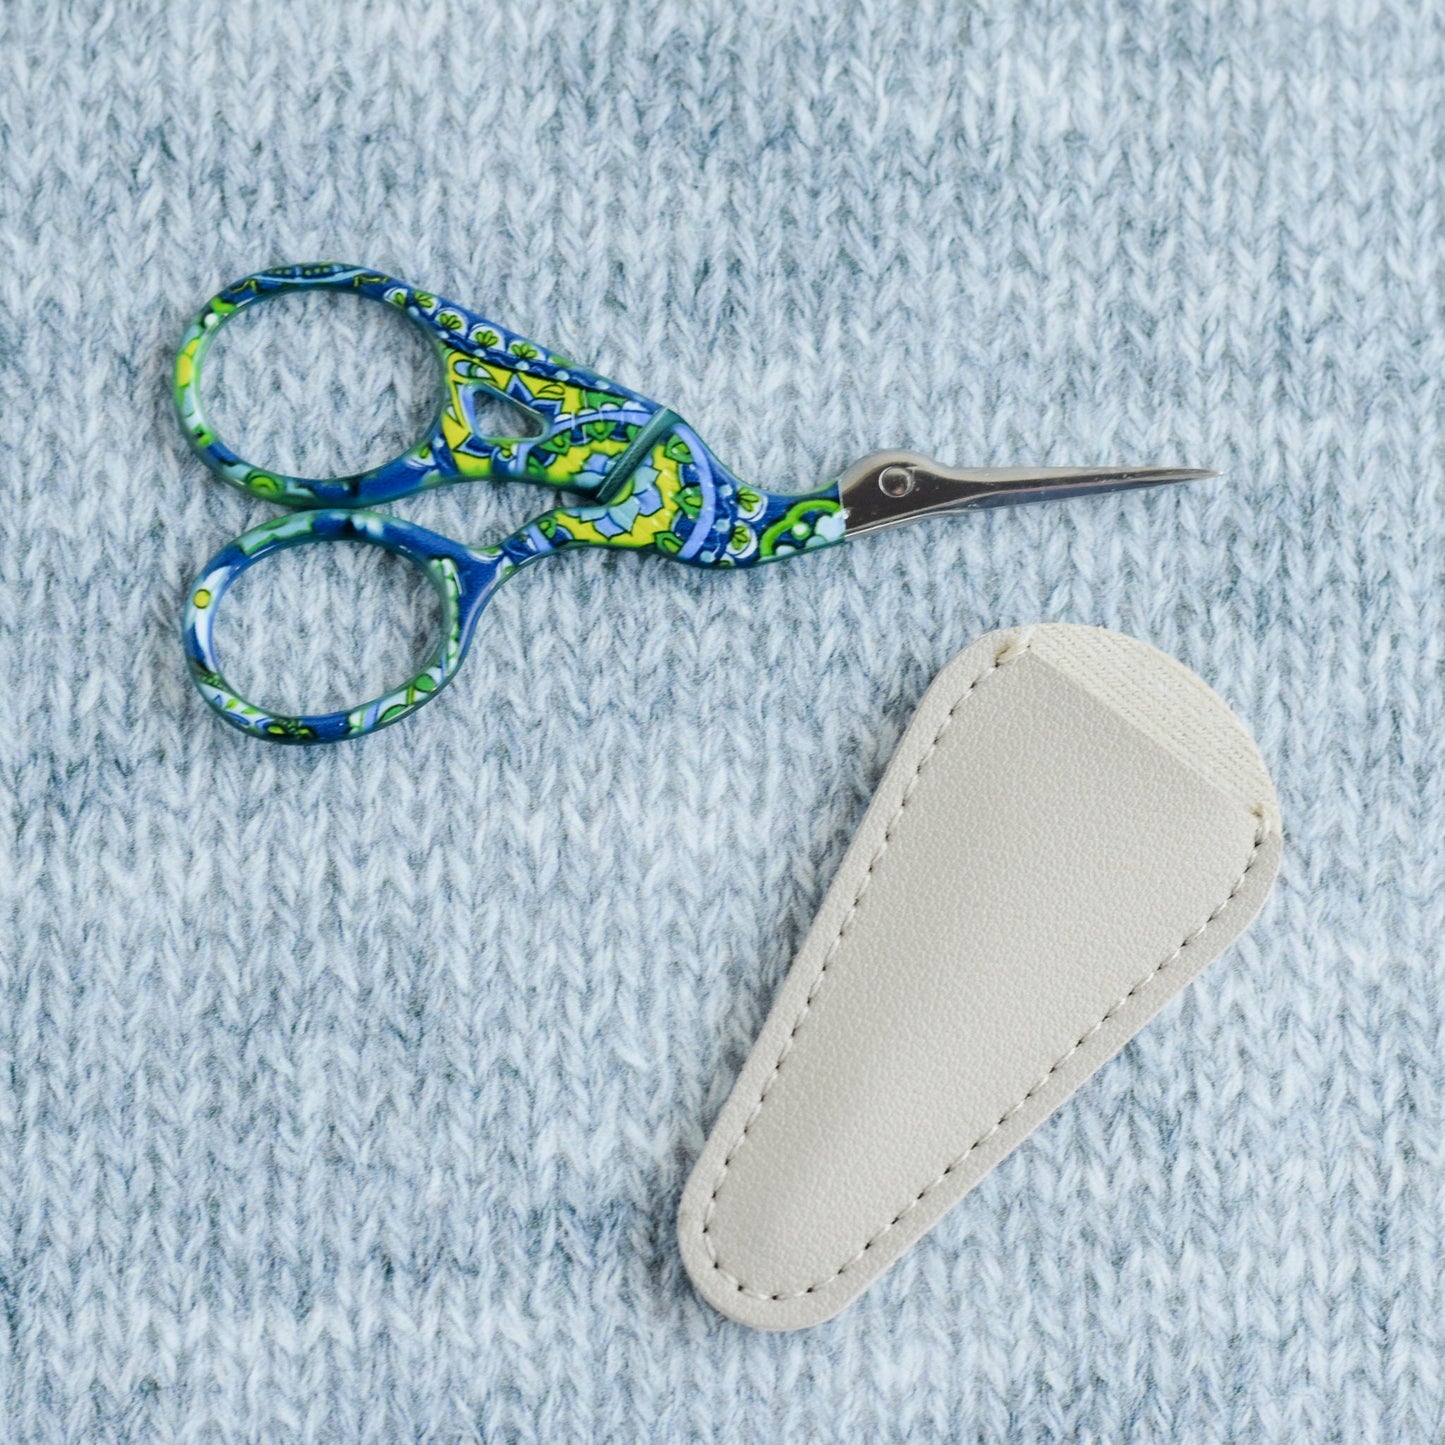 Blue Green Floral stork scissor, Knit Scissors, embroidery scissor, cross stitch accessory, embroidery accessory, Stainless Steel, Cover